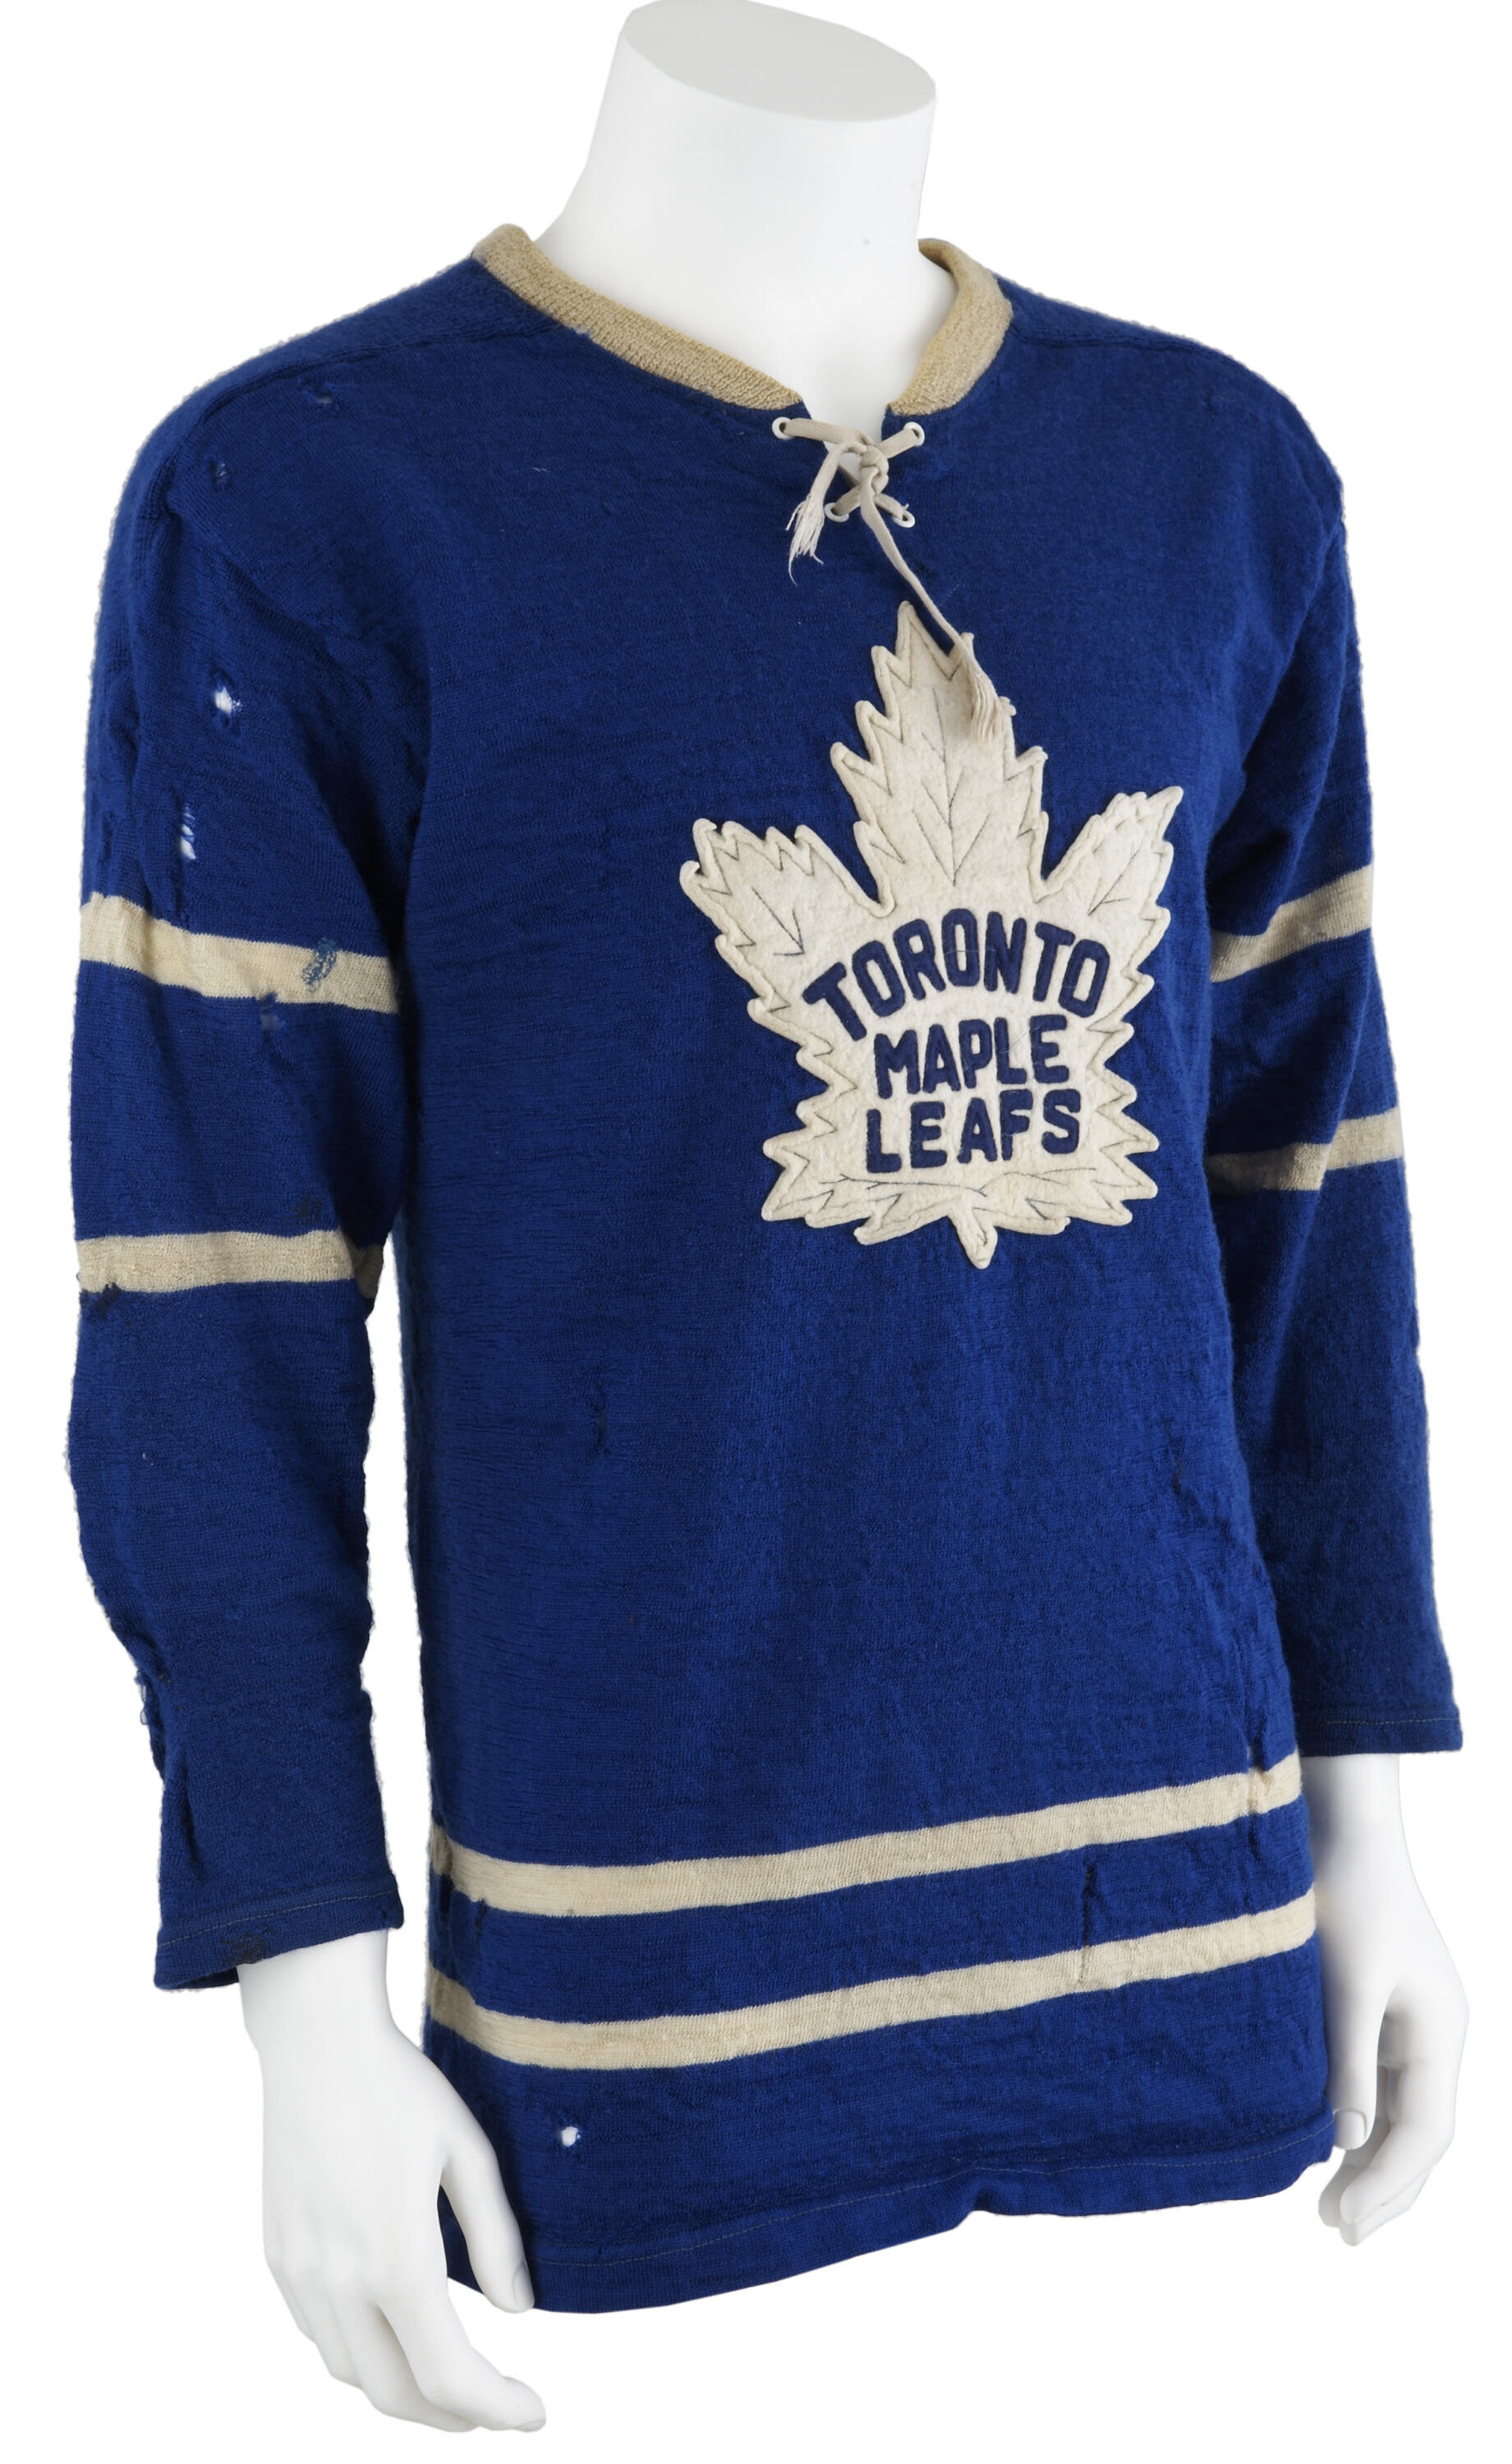 Toronto Maple Leafs 2011 - 2012 home Game Worn Jersey